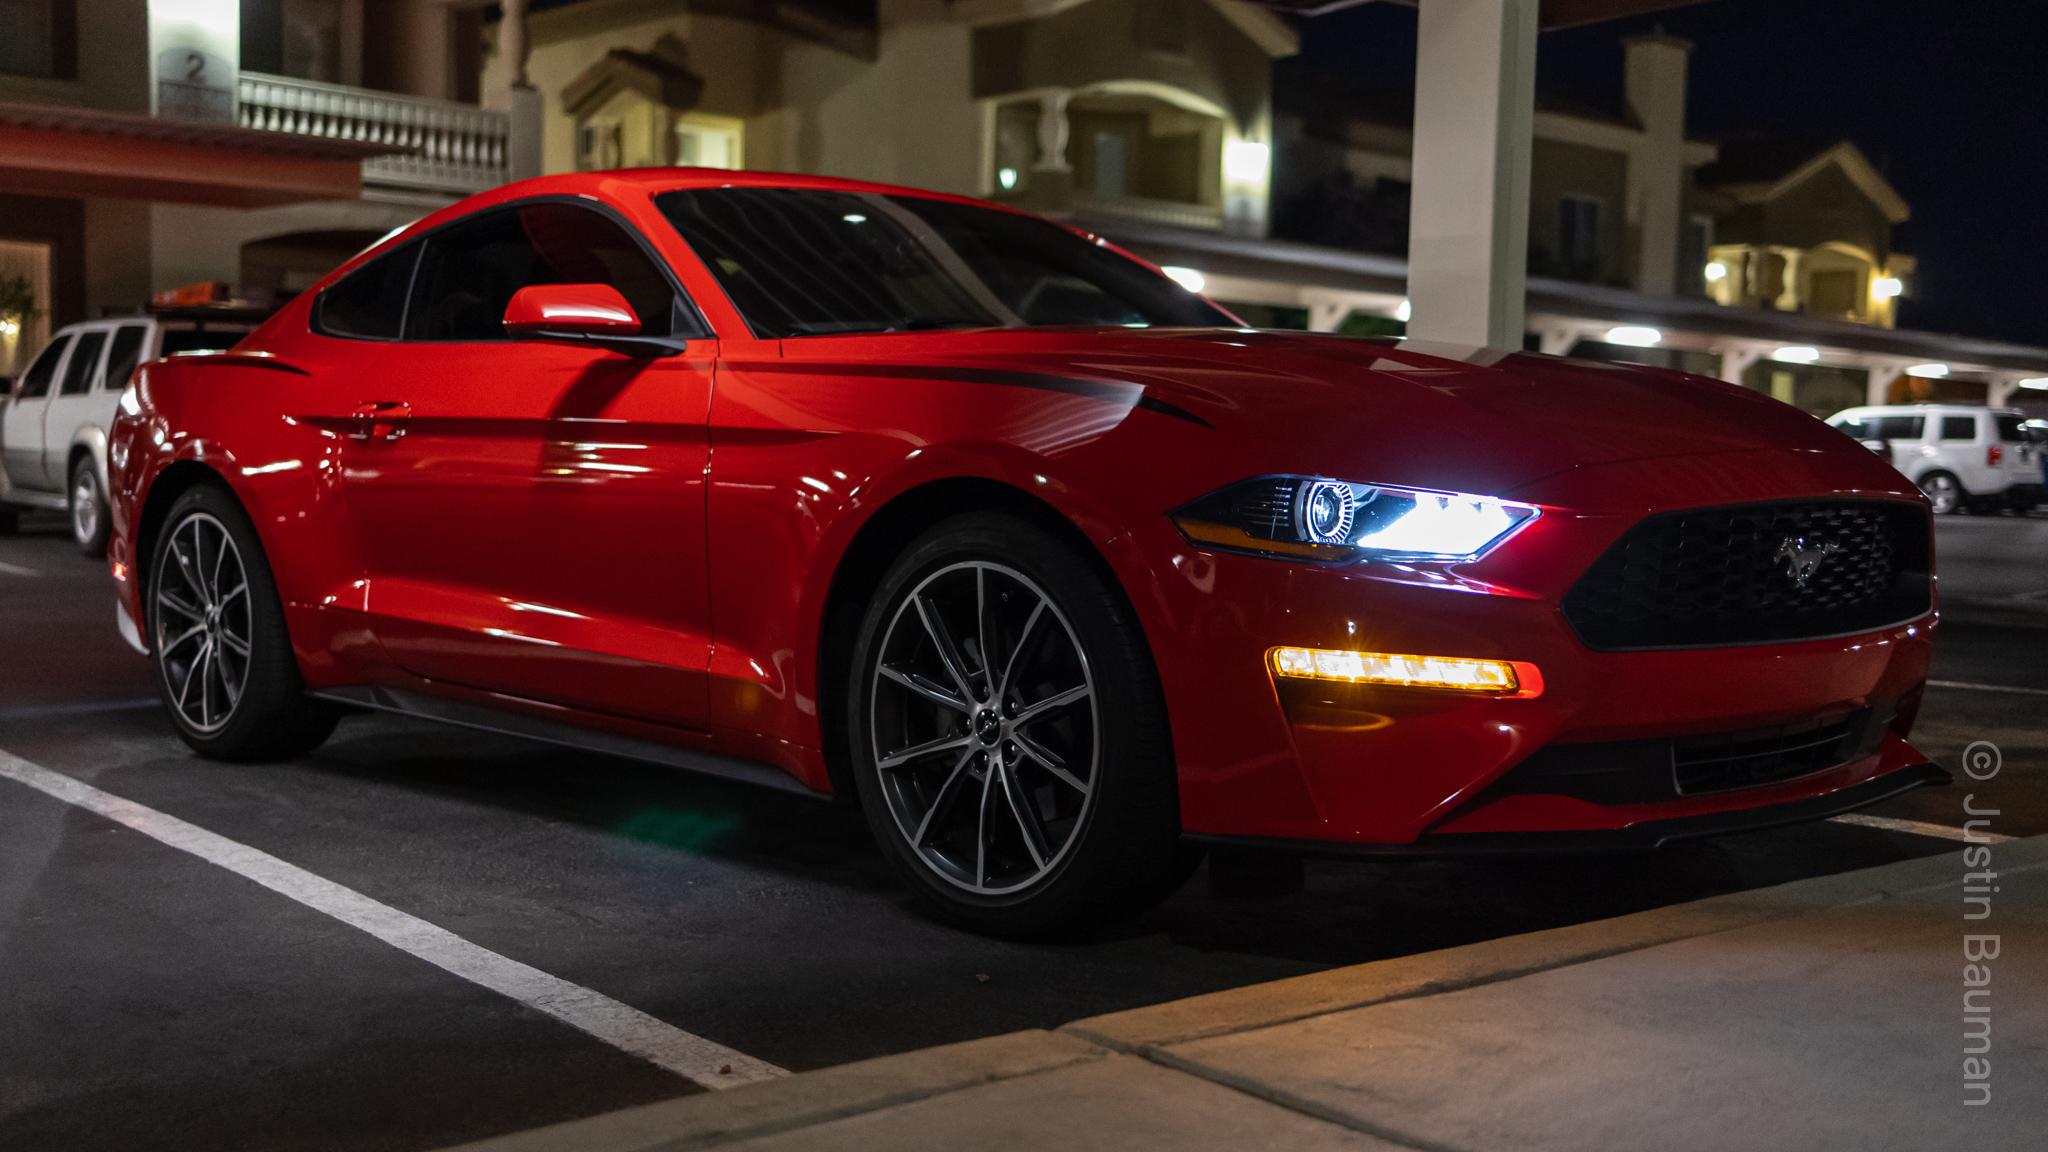 Red Mustang shot from the side